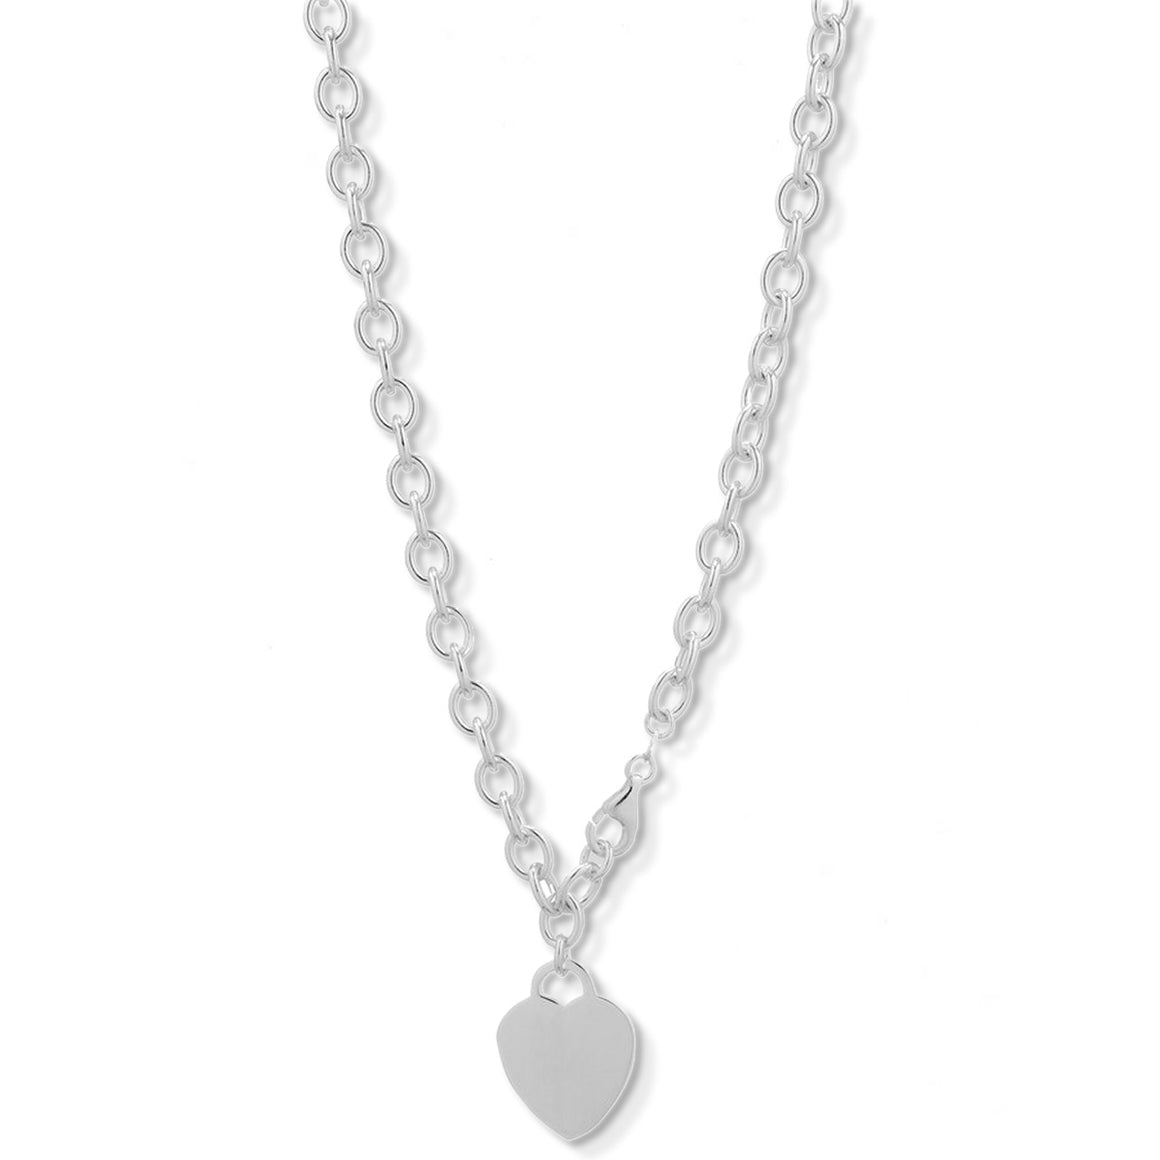 Heart Charm Necklace - 16"